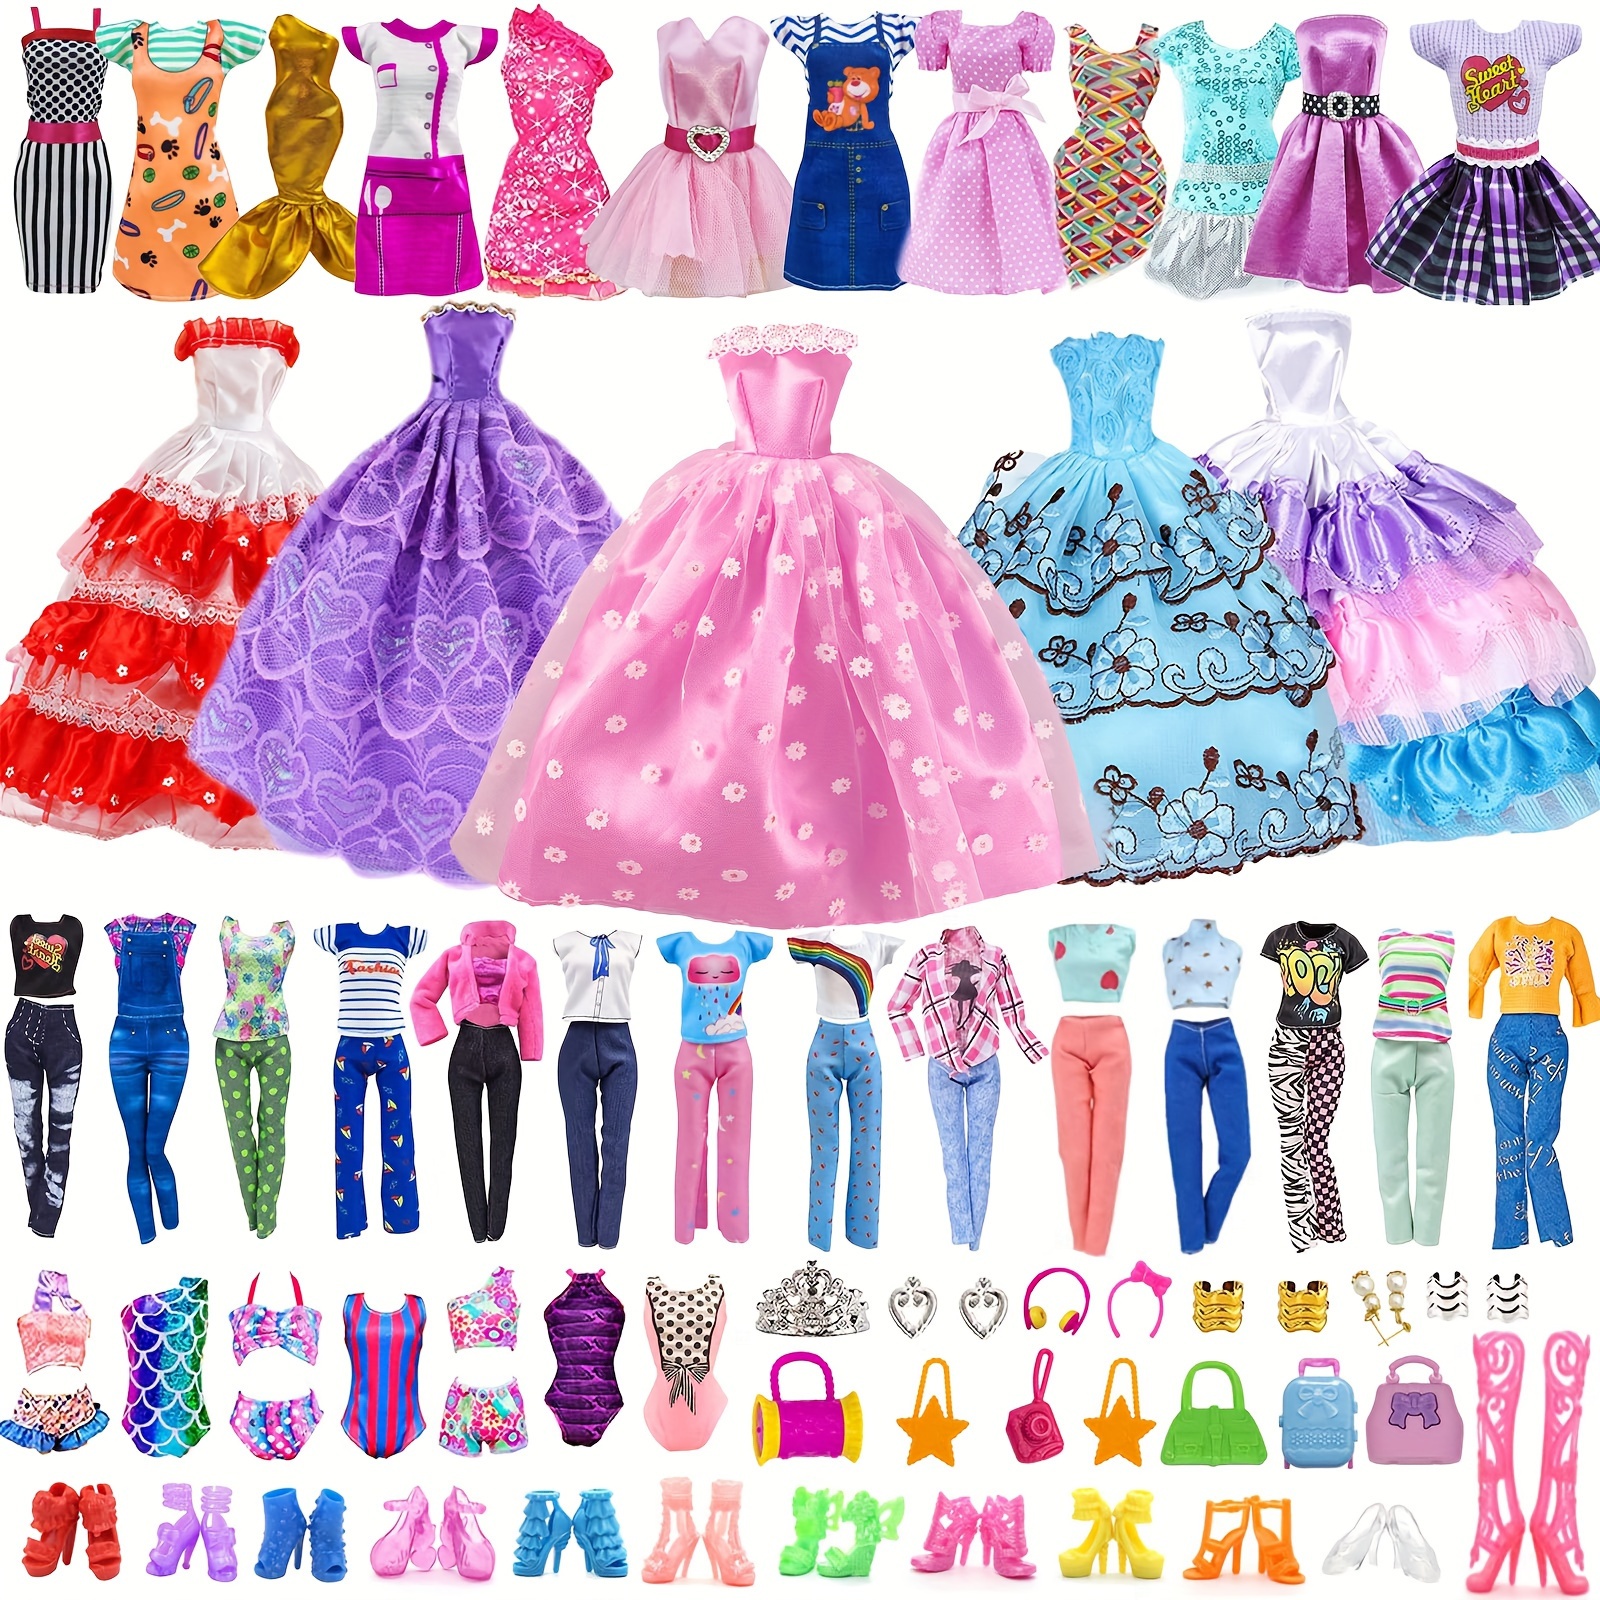 10 Pcs Doll Dress Pack Fashion Handmade Outfits For Barbie Dolls 11.5 inch  Gift